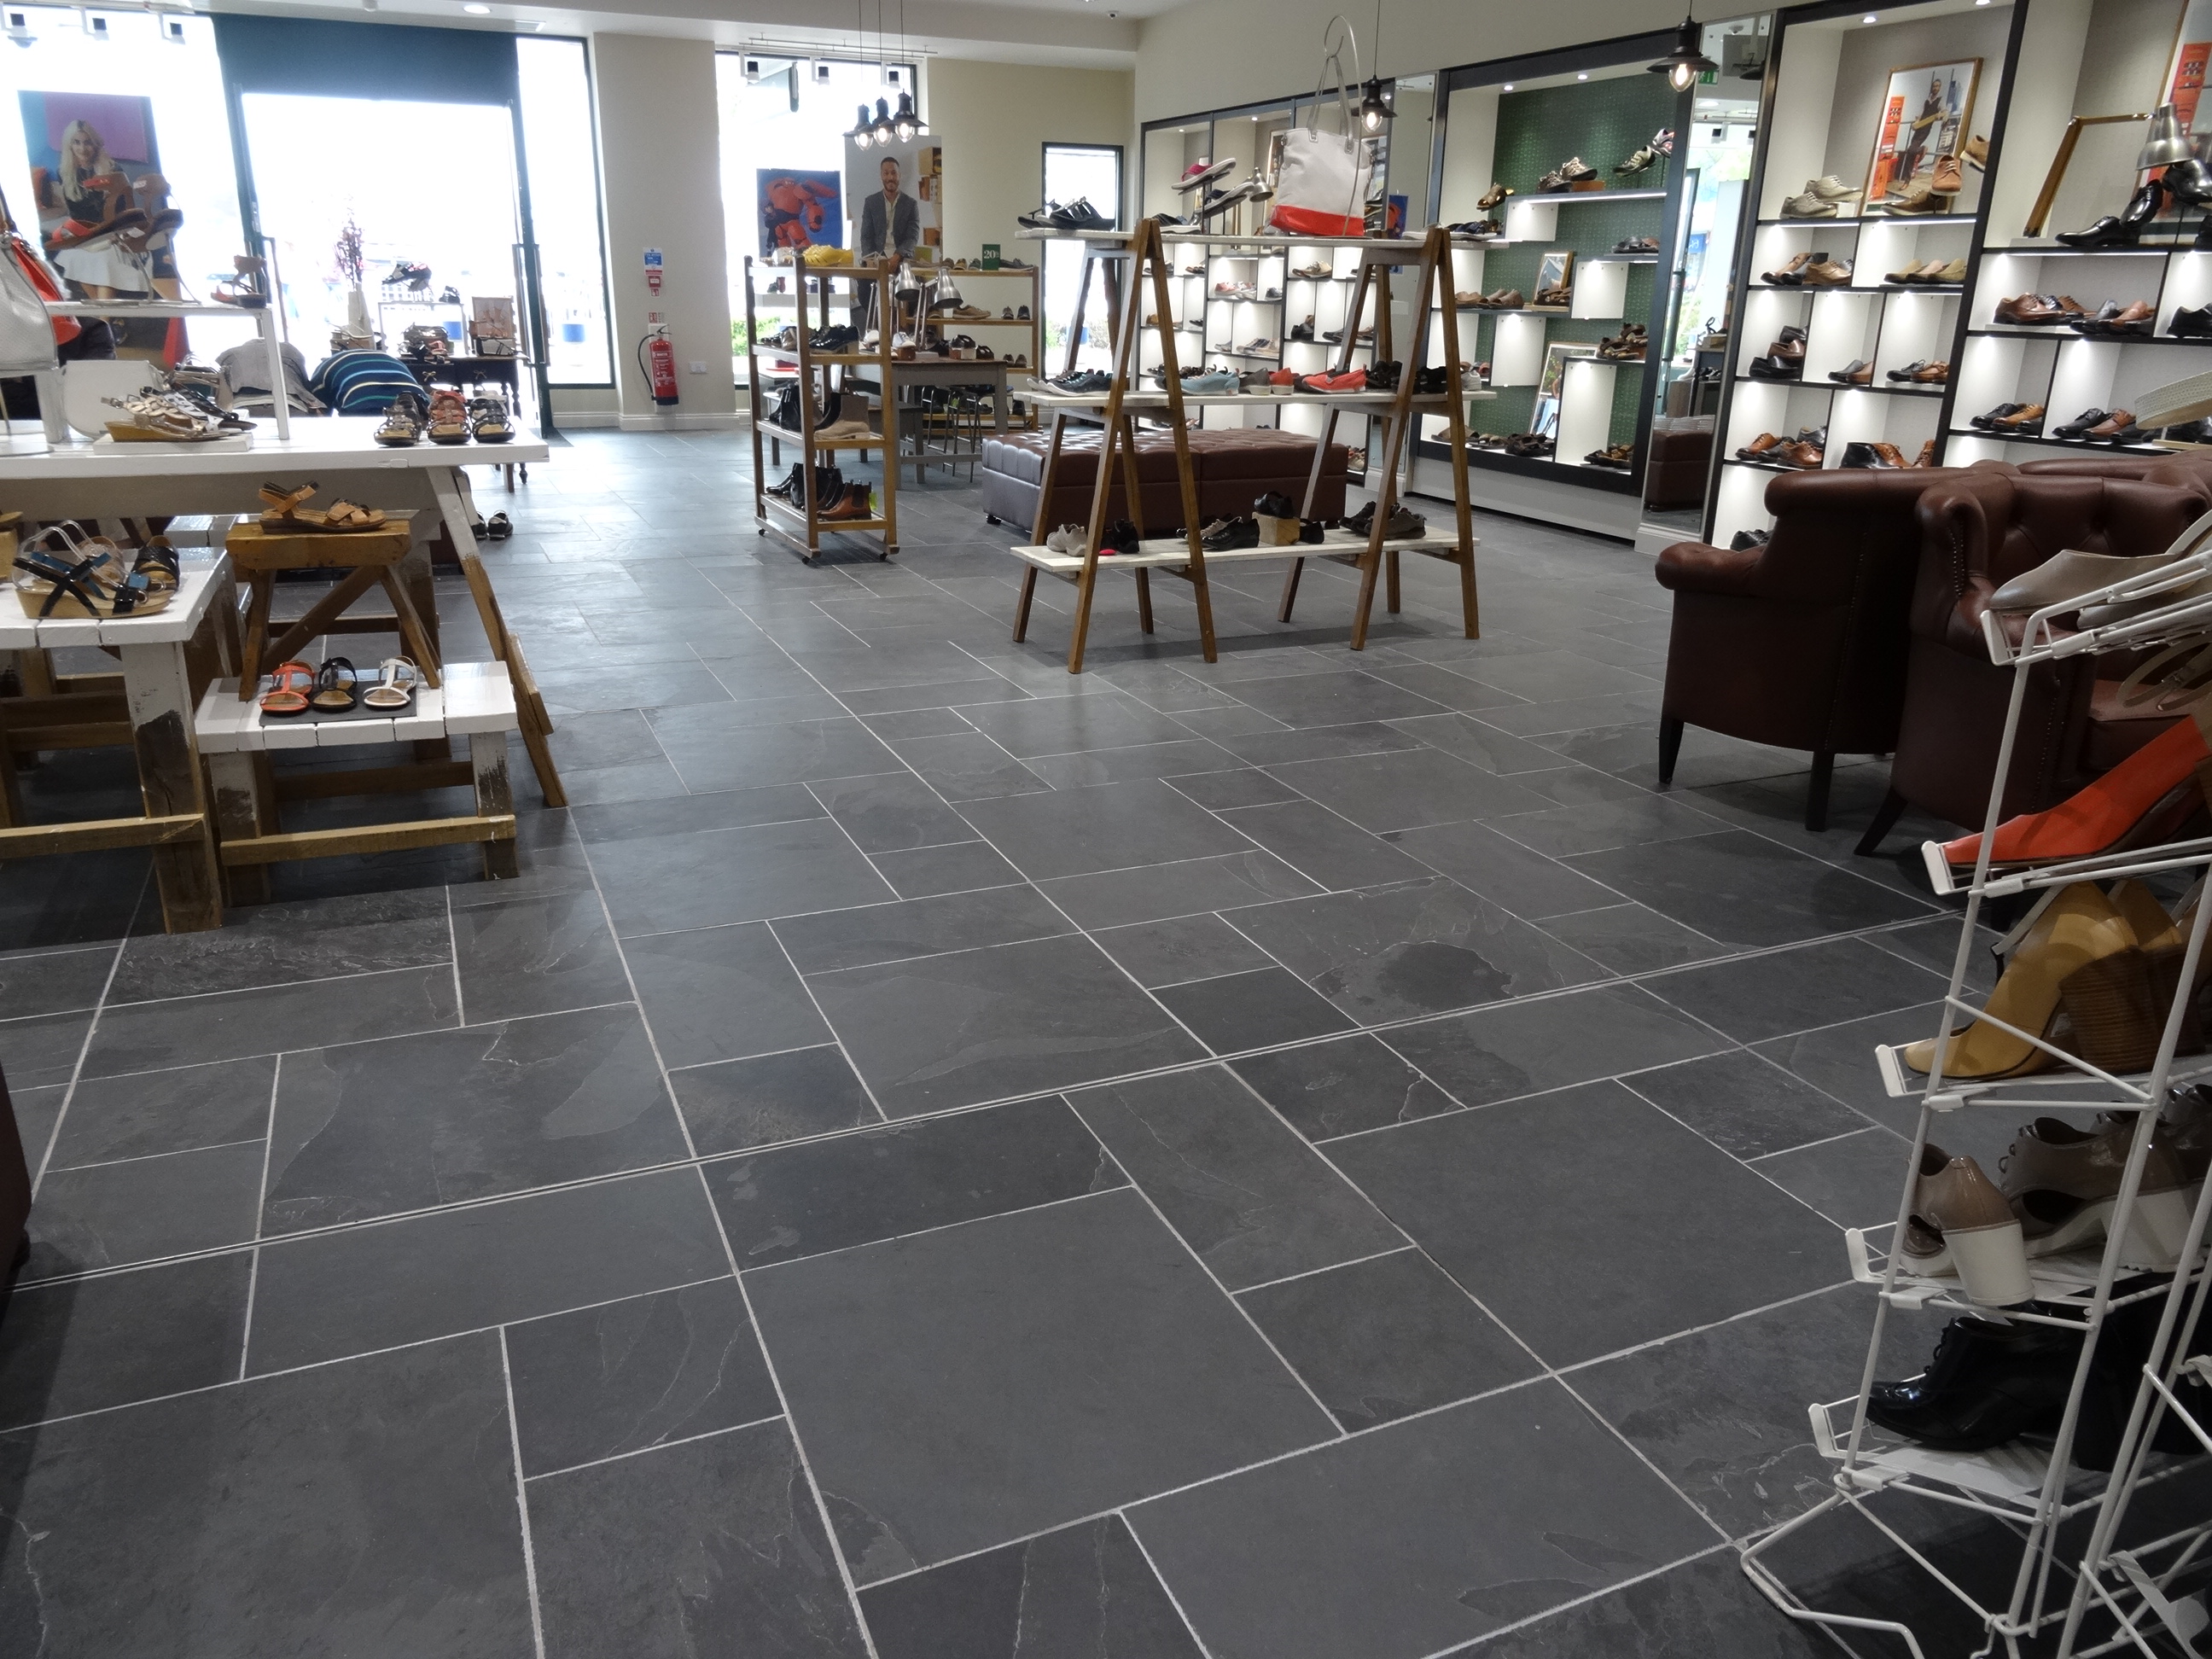 Clarks Shoes Monks Cross Retail Park York The Great Northern Tiling